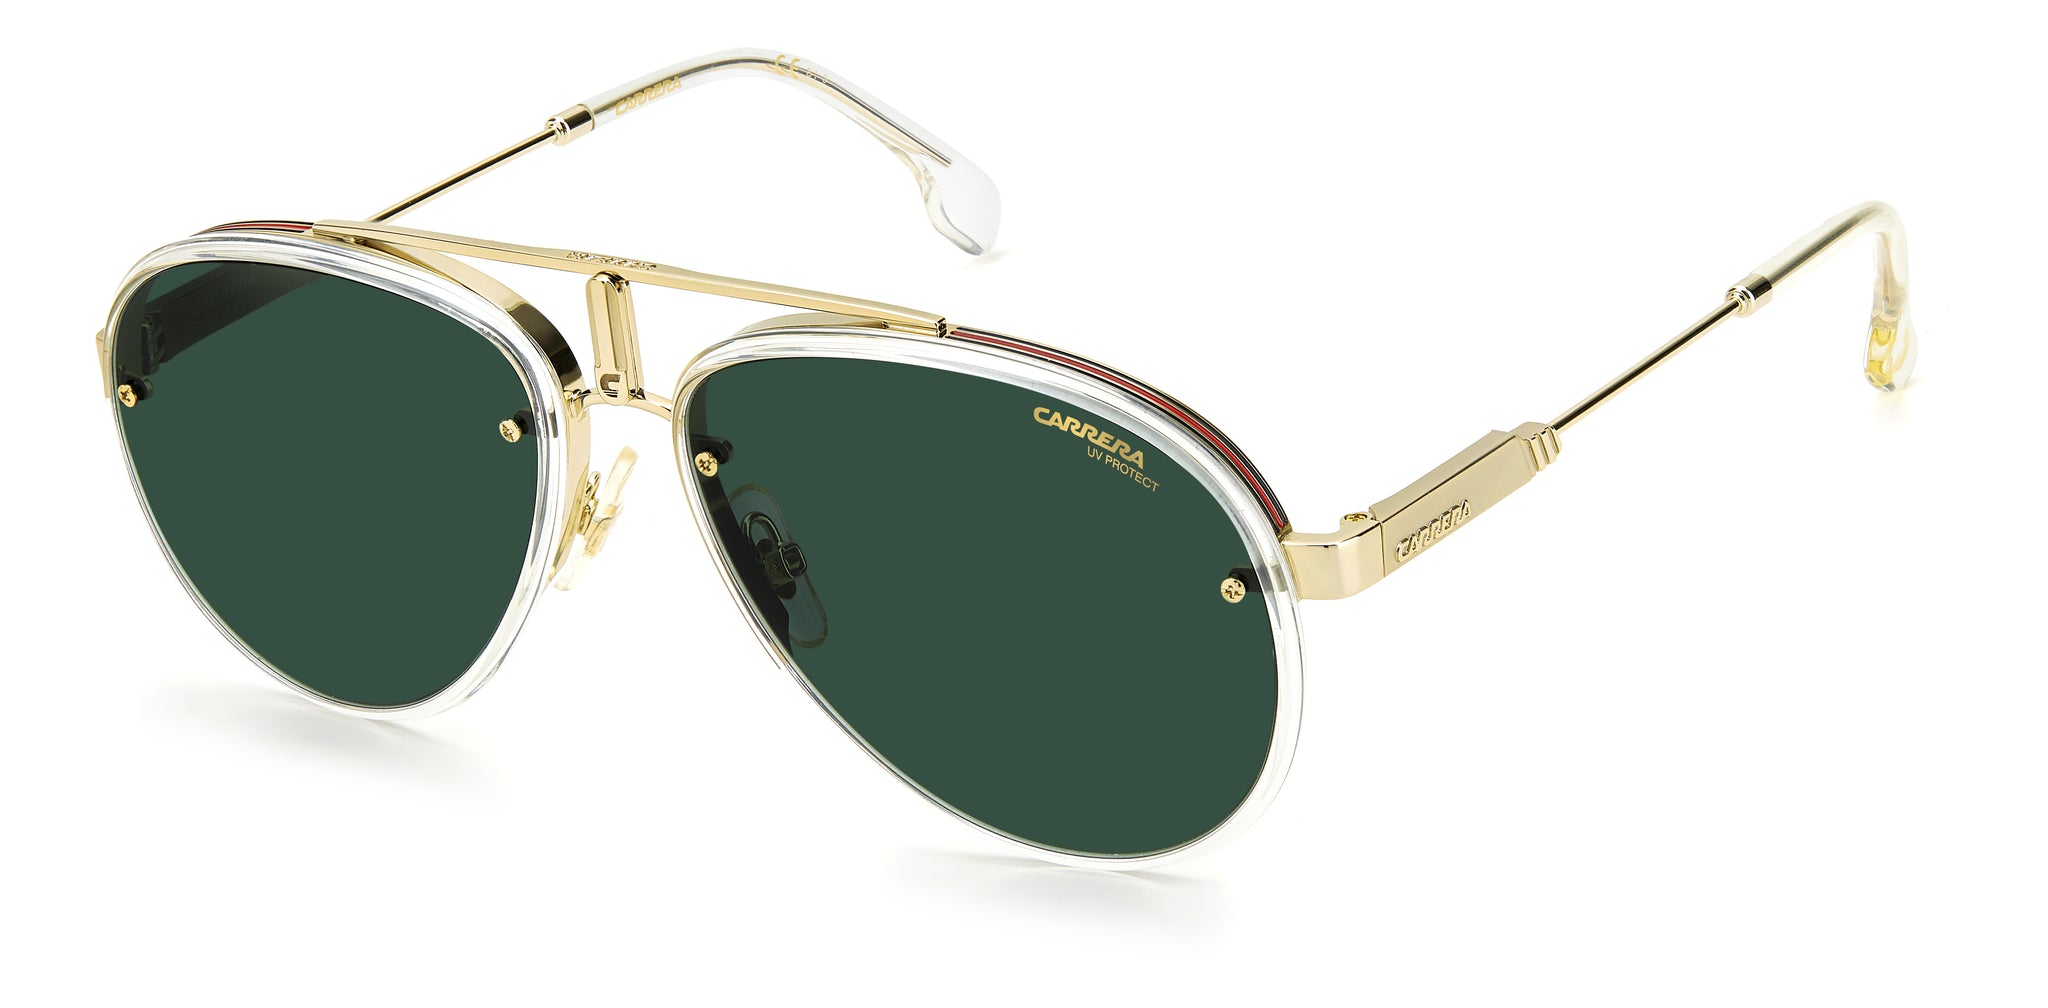 CARRERA GLORY CRYSTAL 58 – The Eyewear Outlet